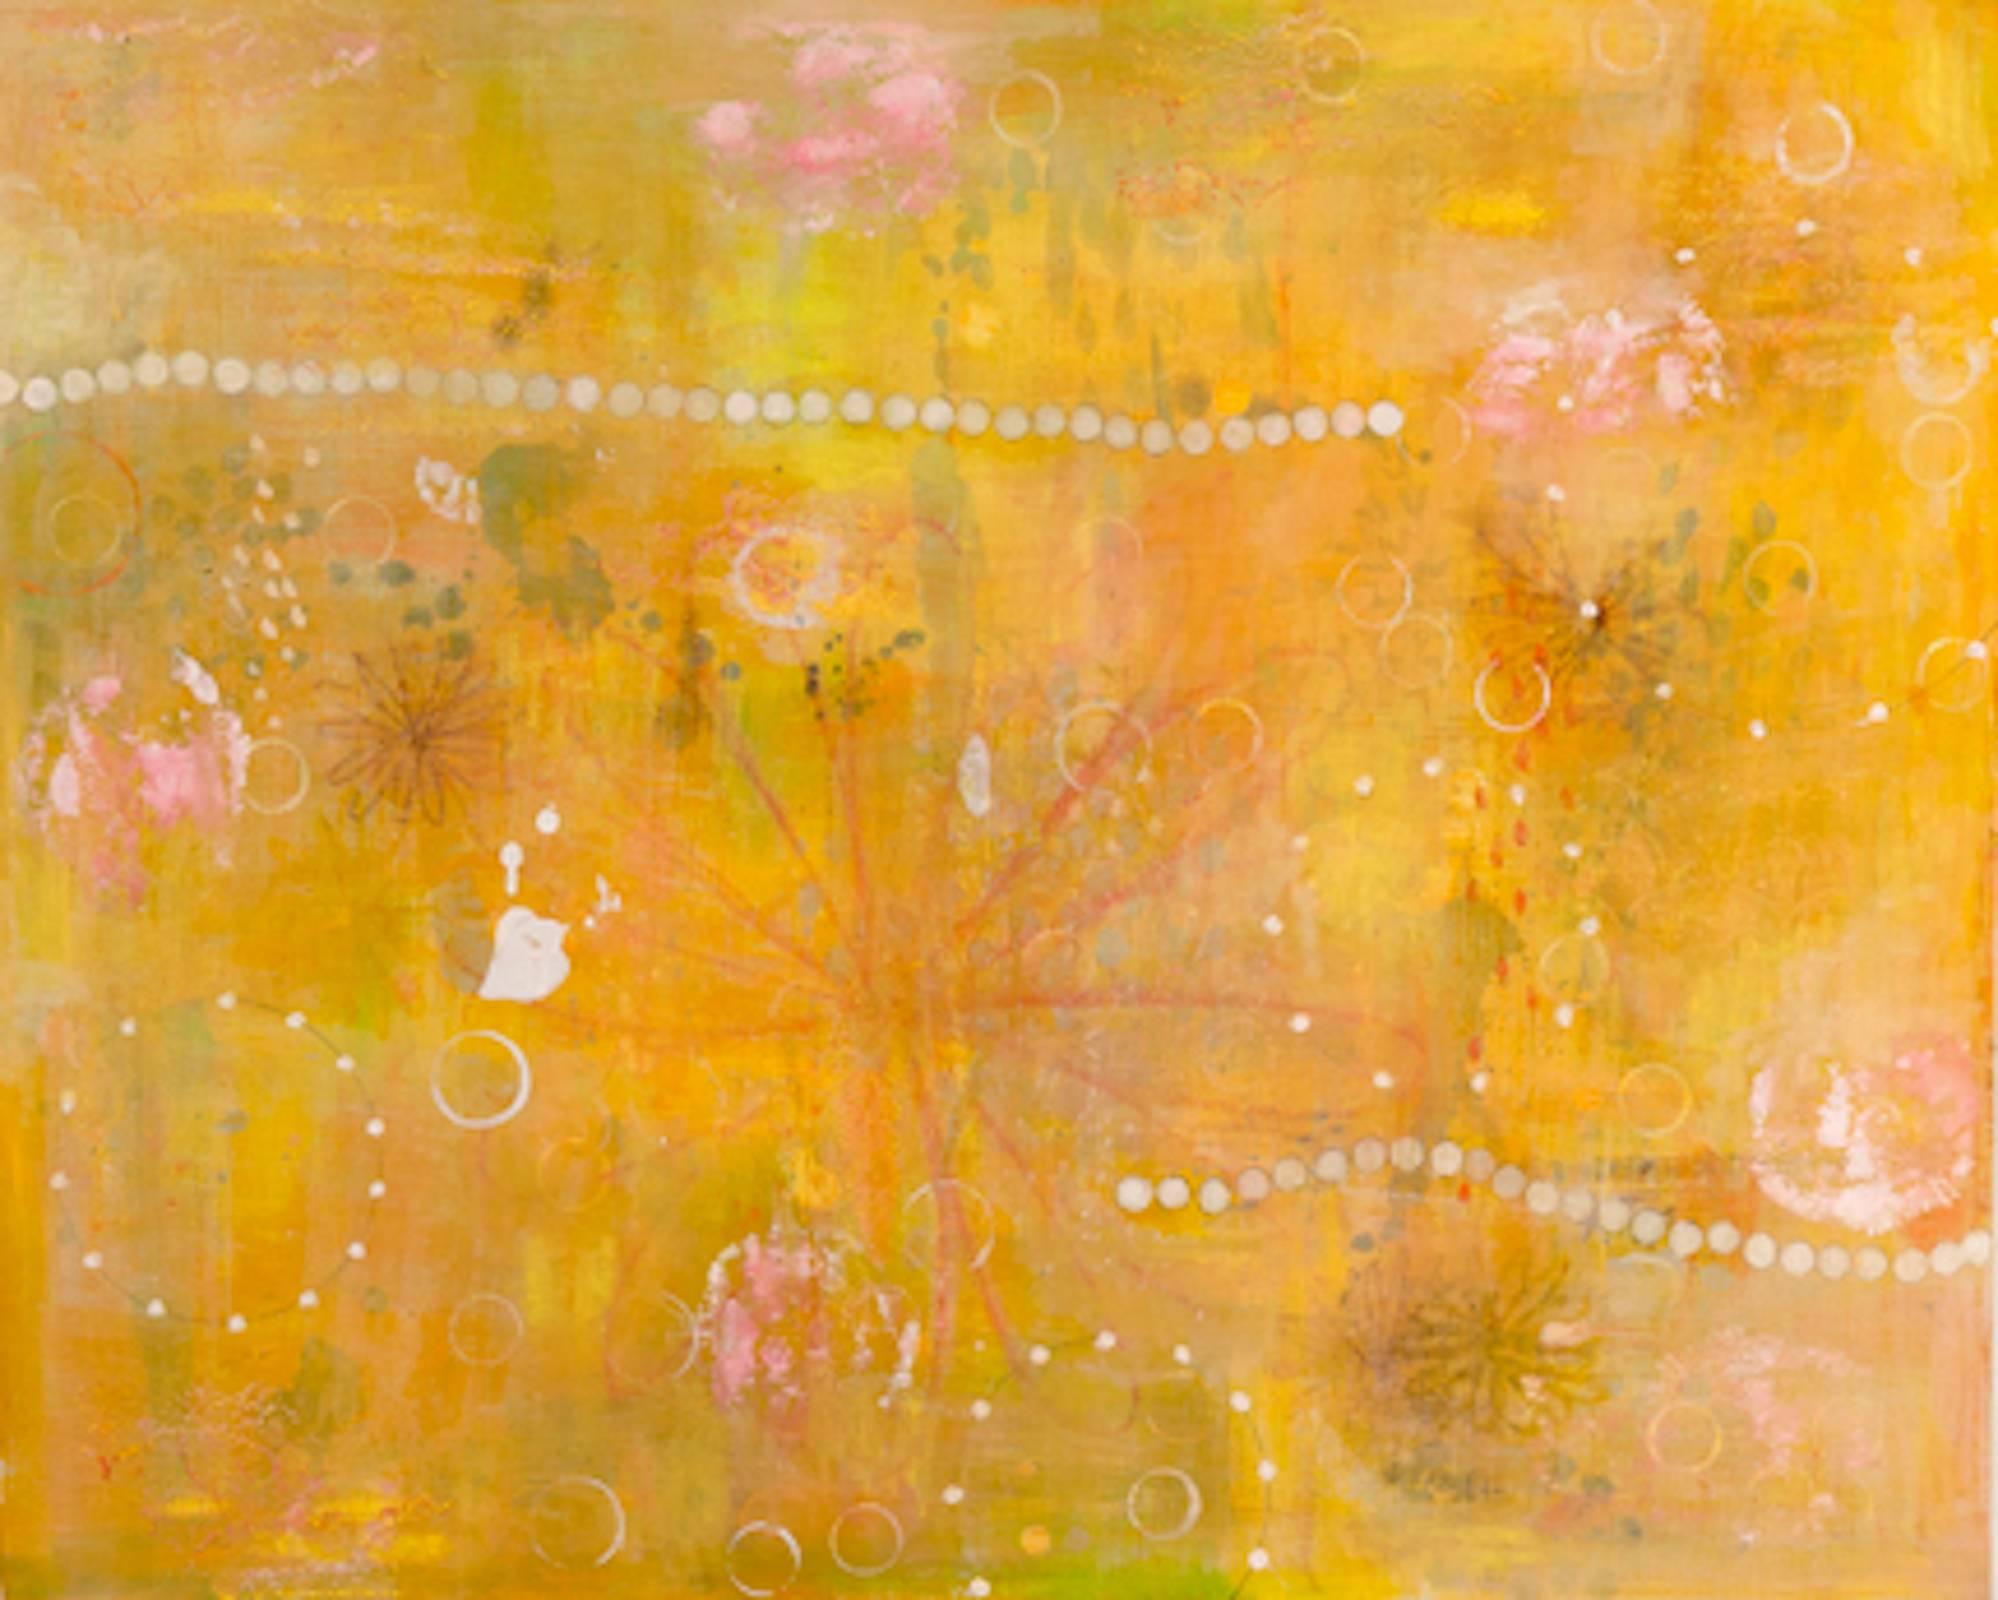 Daru Jung Hyang Kim Abstract Painting - yellow - abstract intricate nature inspired contemporary oil painting